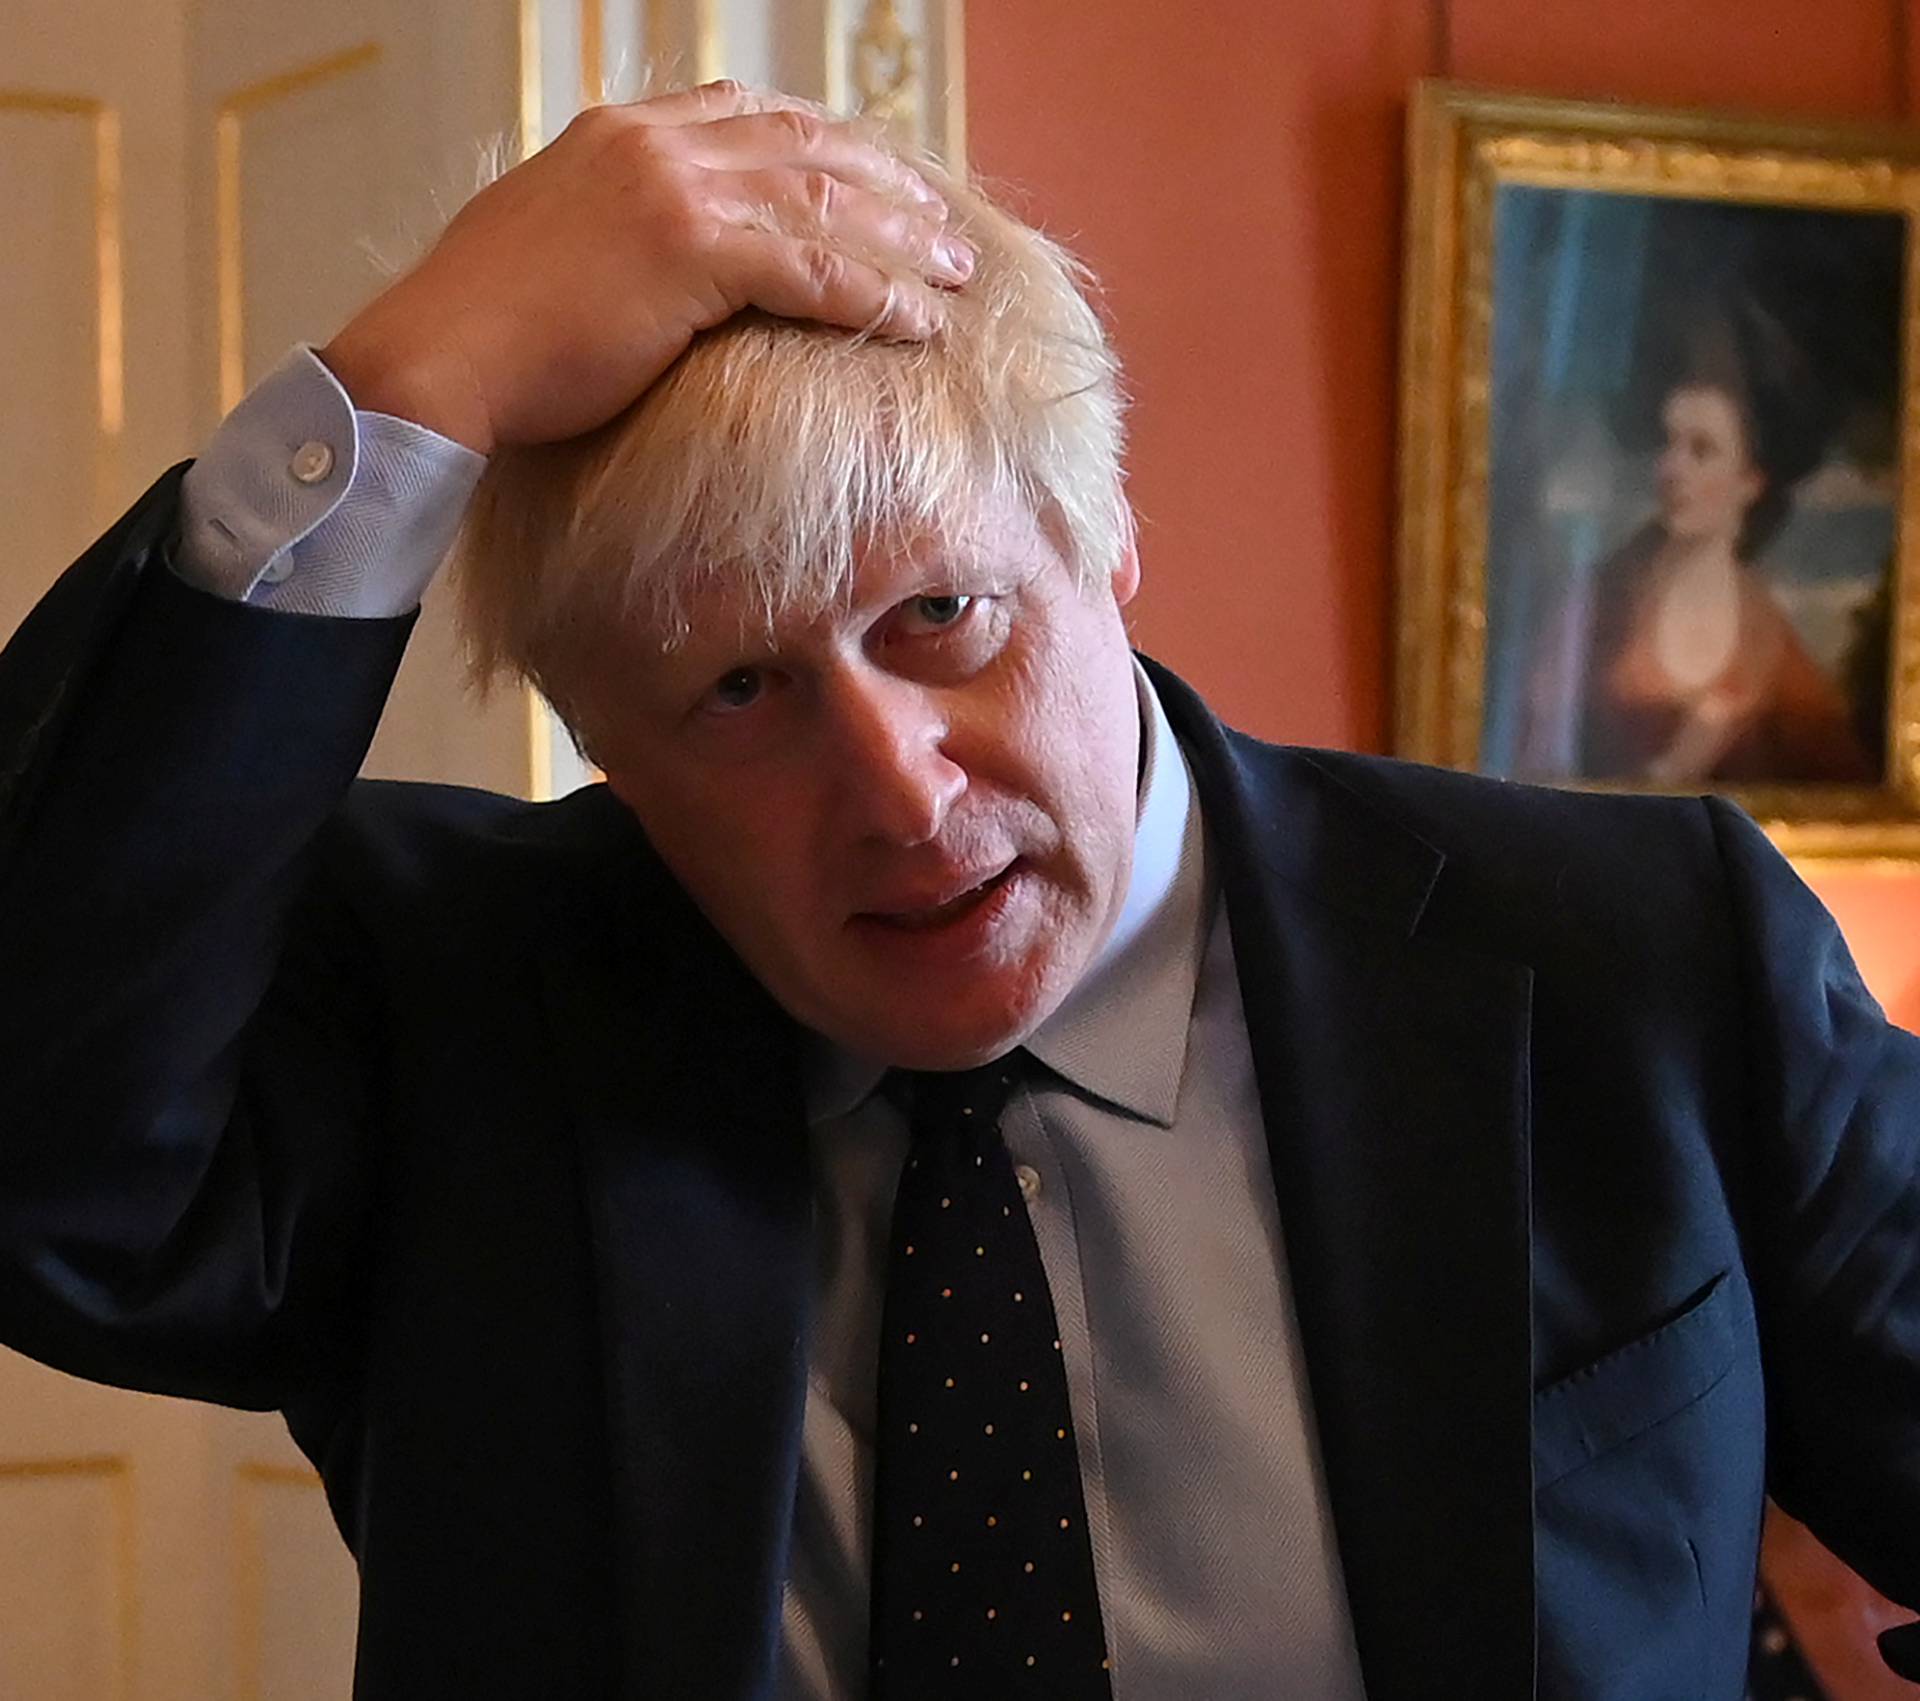 Britain's Prime Minister Boris Johnson meets with NHS workers inside 10 Downing Street in London